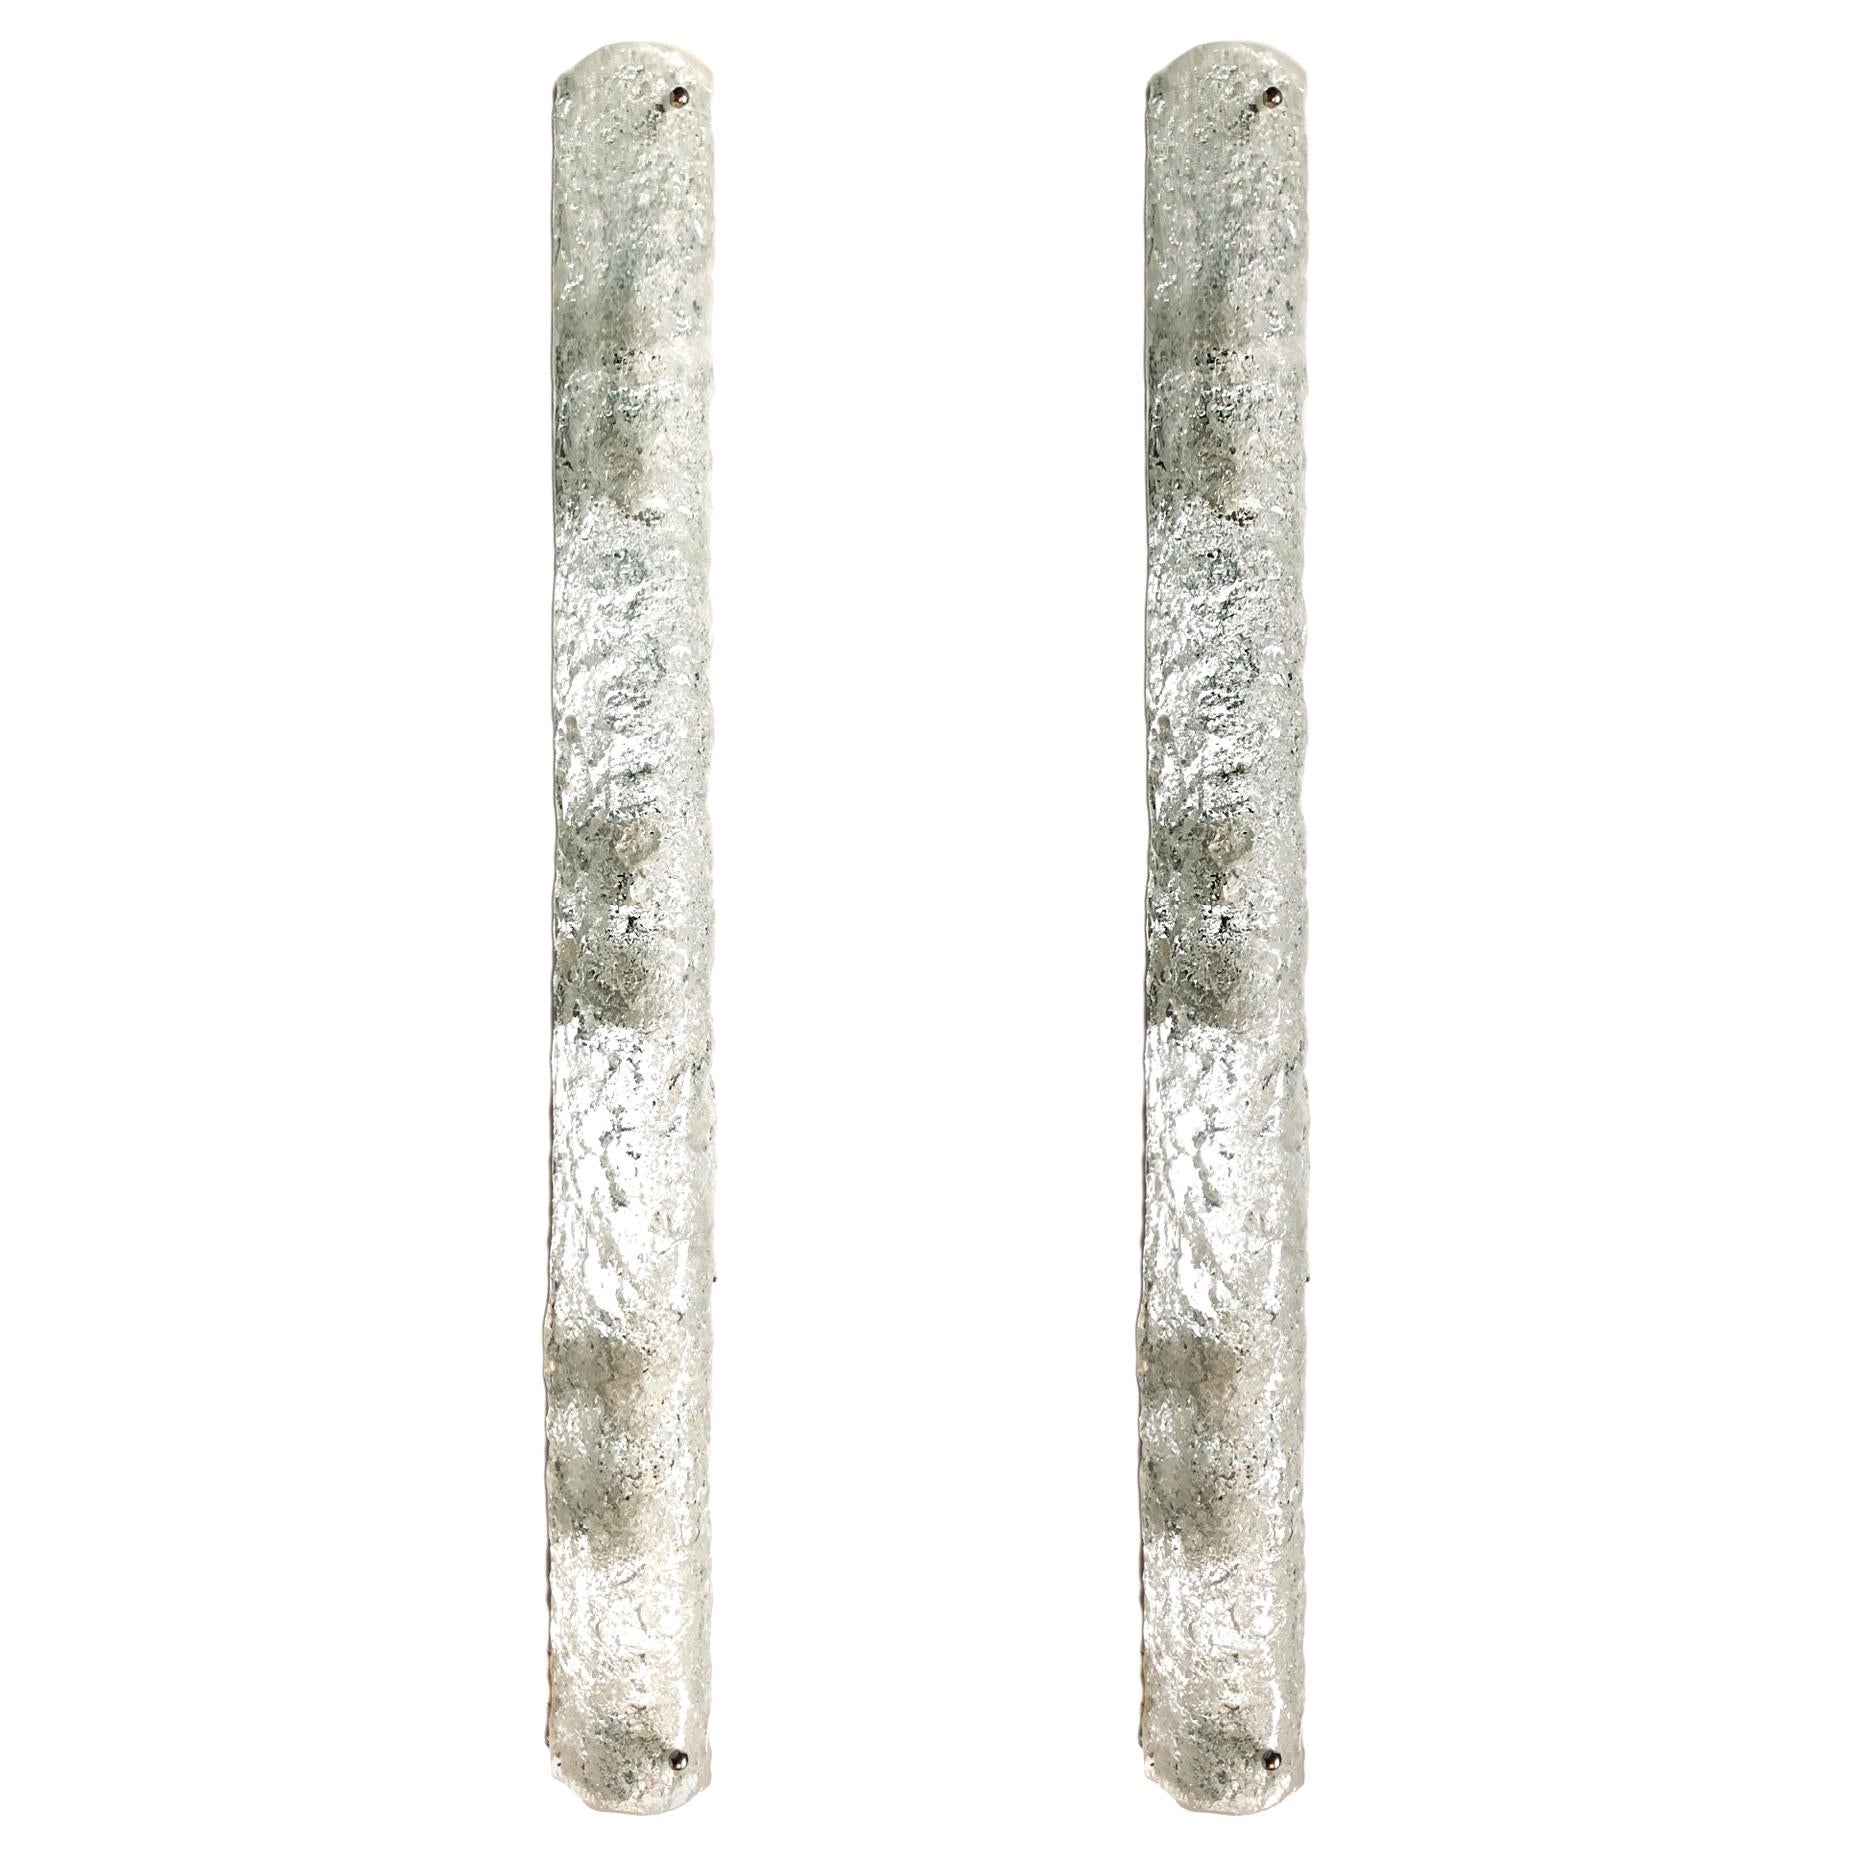 Pair of Large Molded Glass Sconces, Sold in Pairs